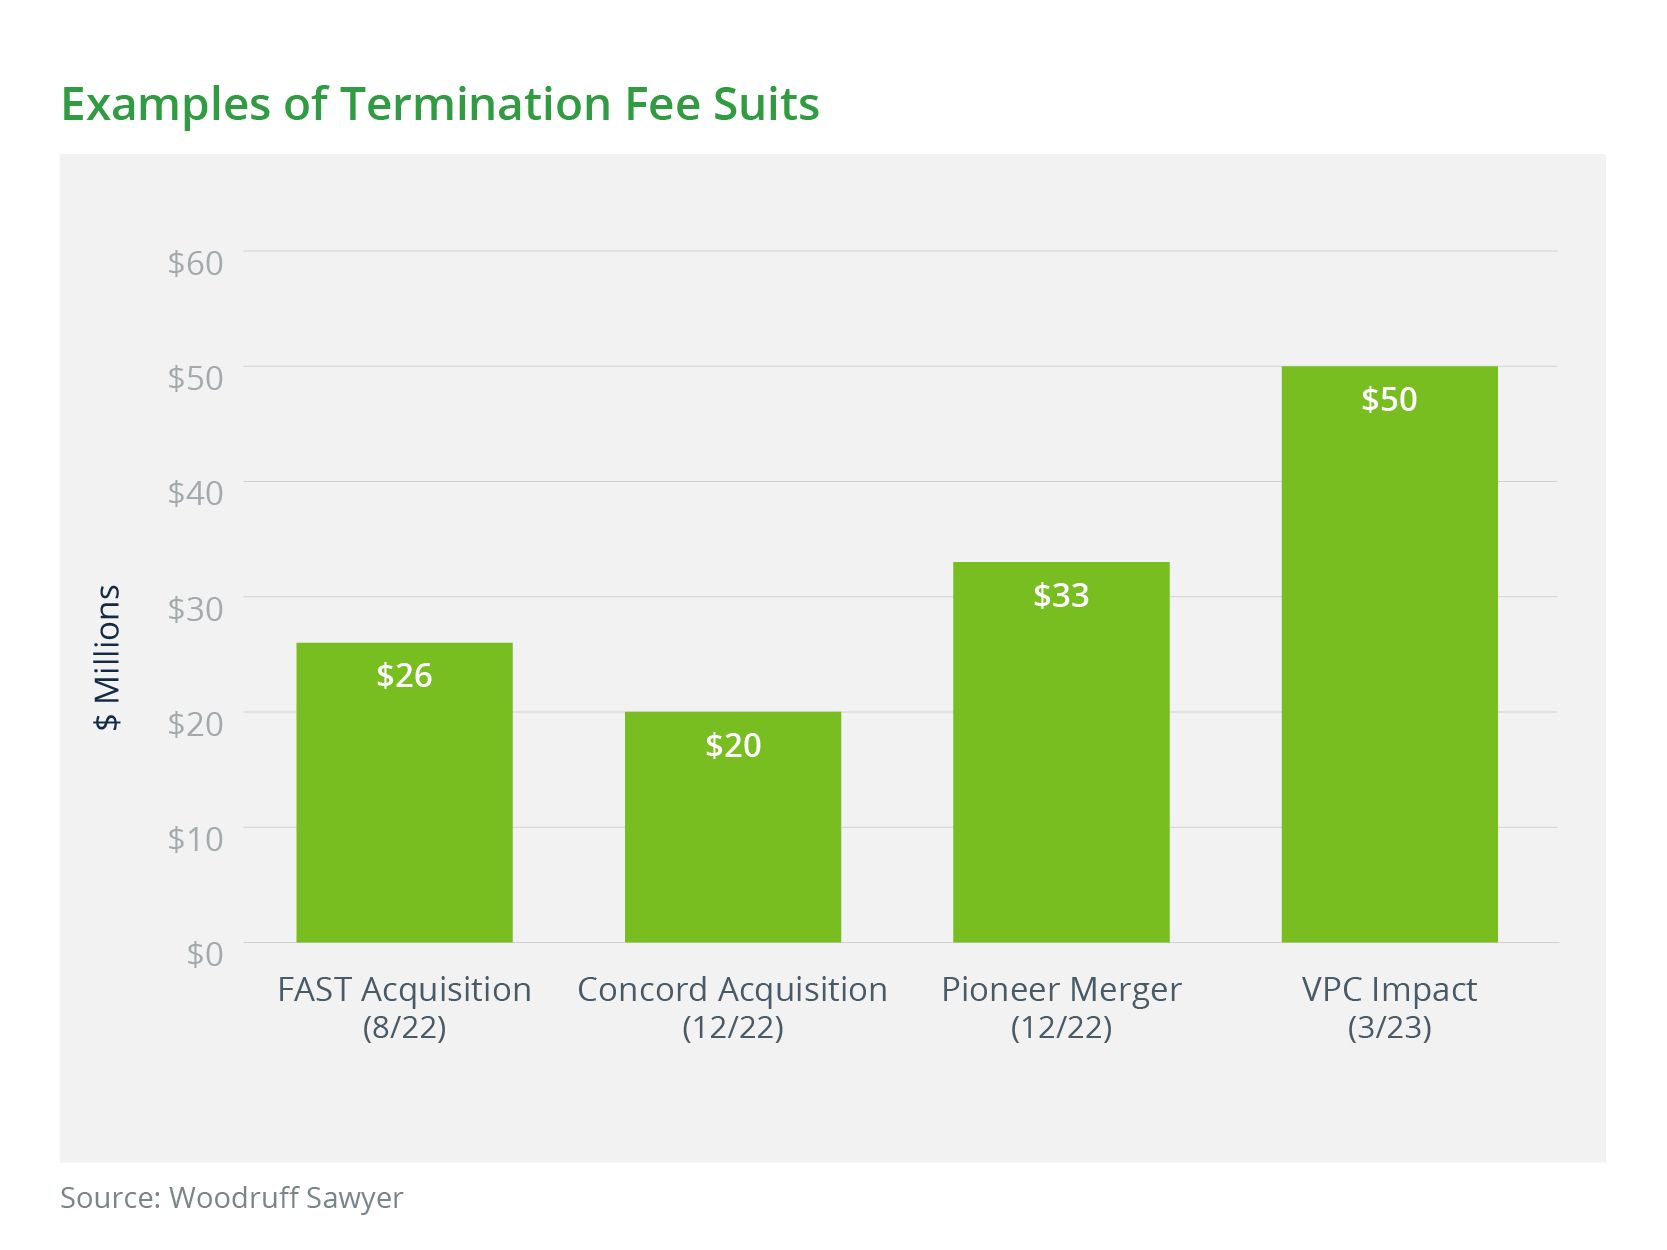 Examples of Termination Fee Suits